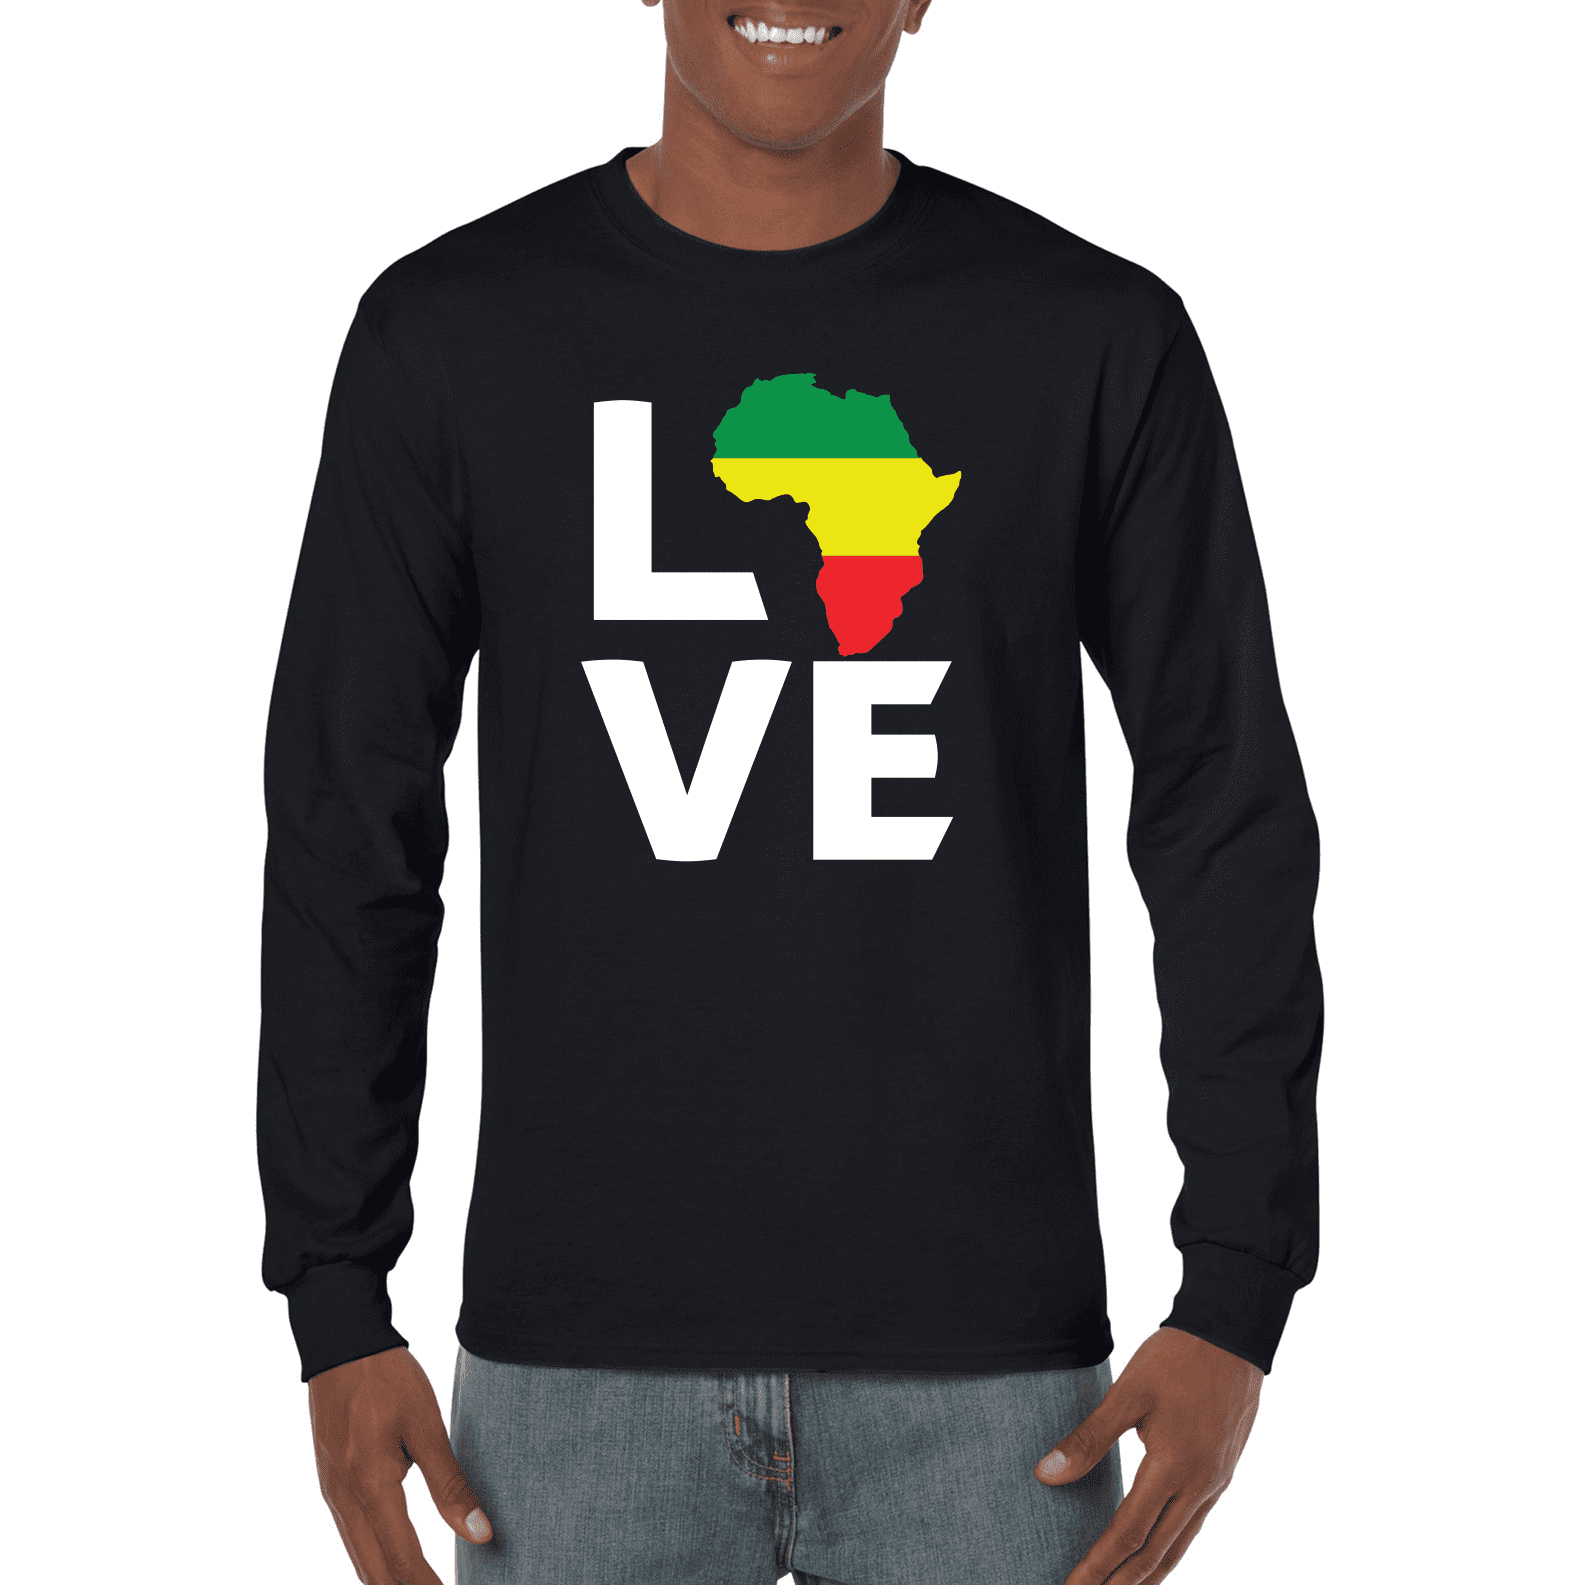 Novelty Tee Black Excellence T-shirt Black History Inspired